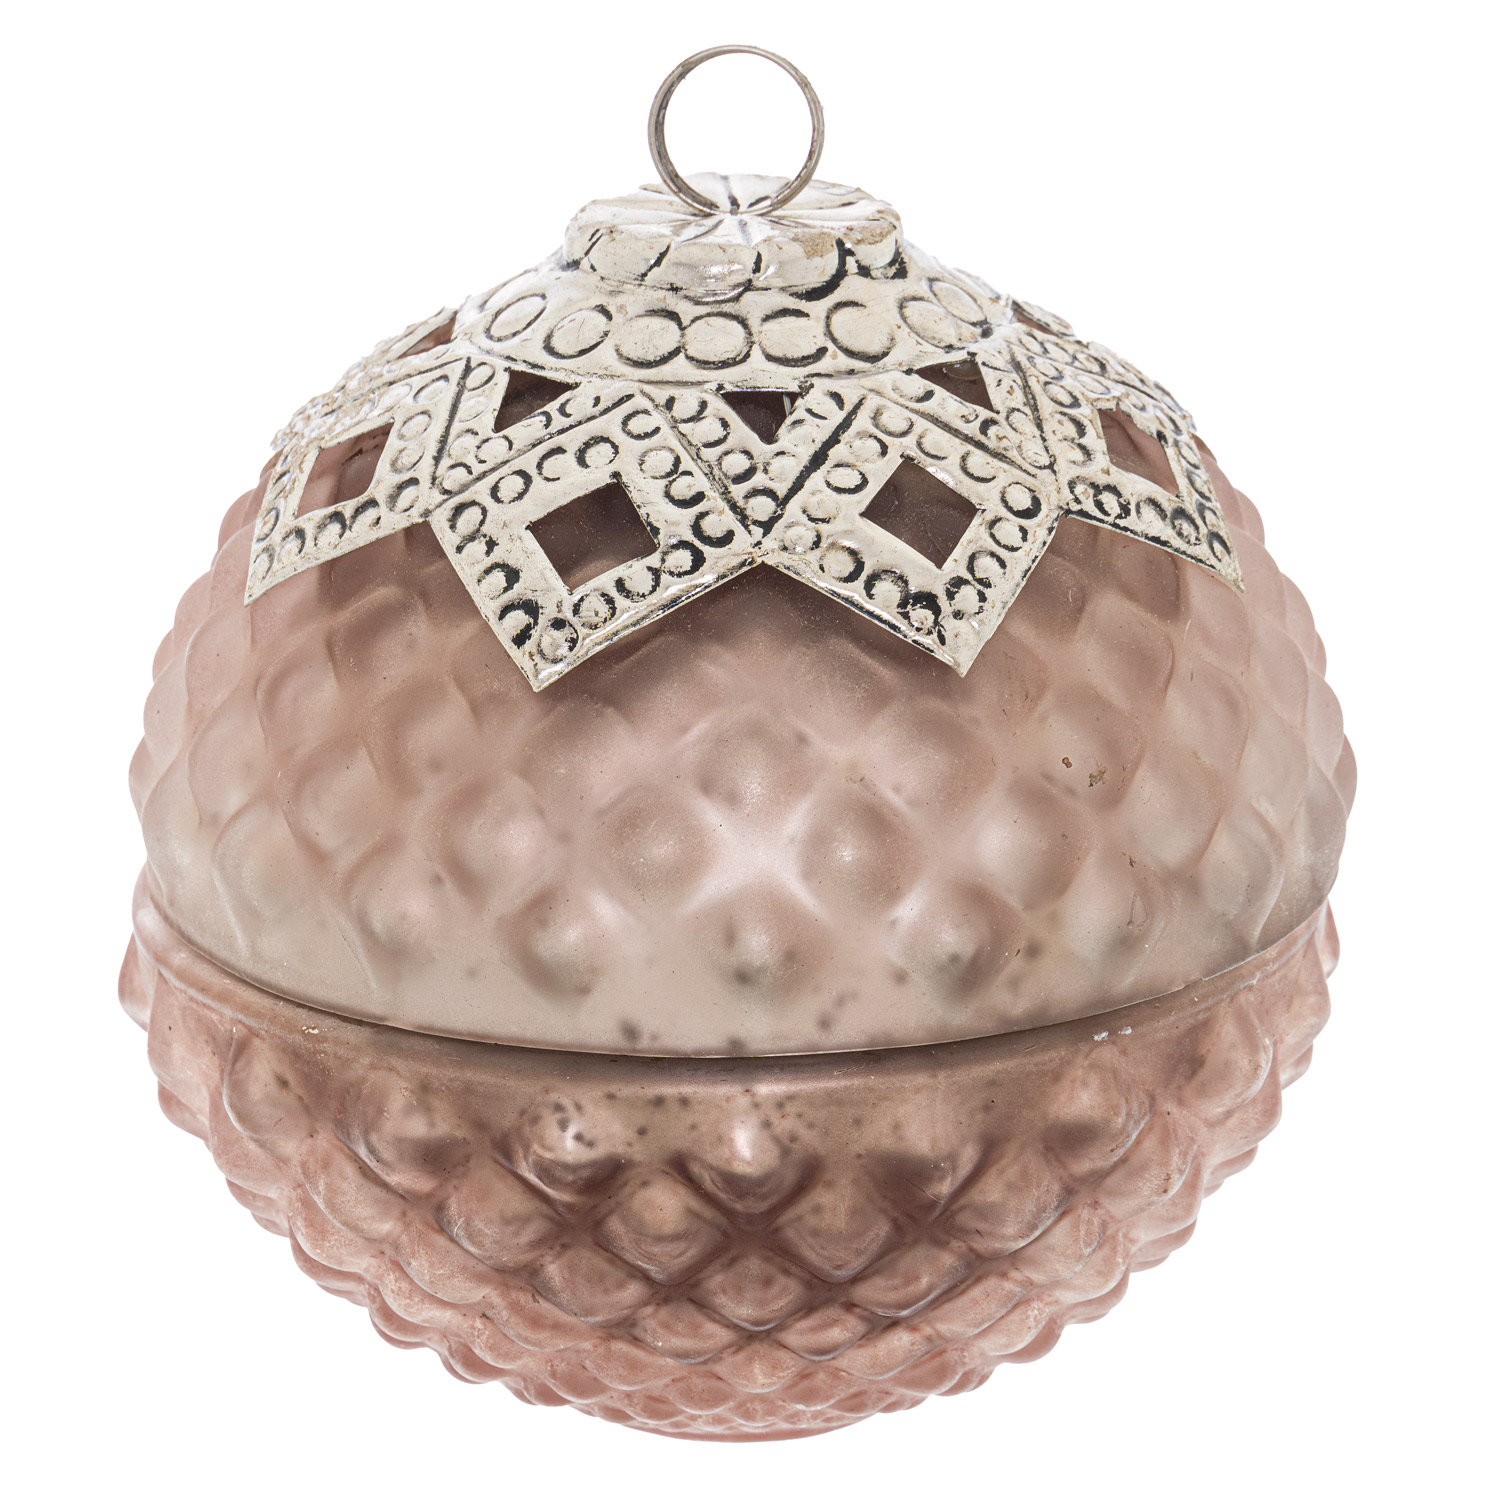 The Noel Collection Venus Diamond Crested Trinket Bauble - Image 1